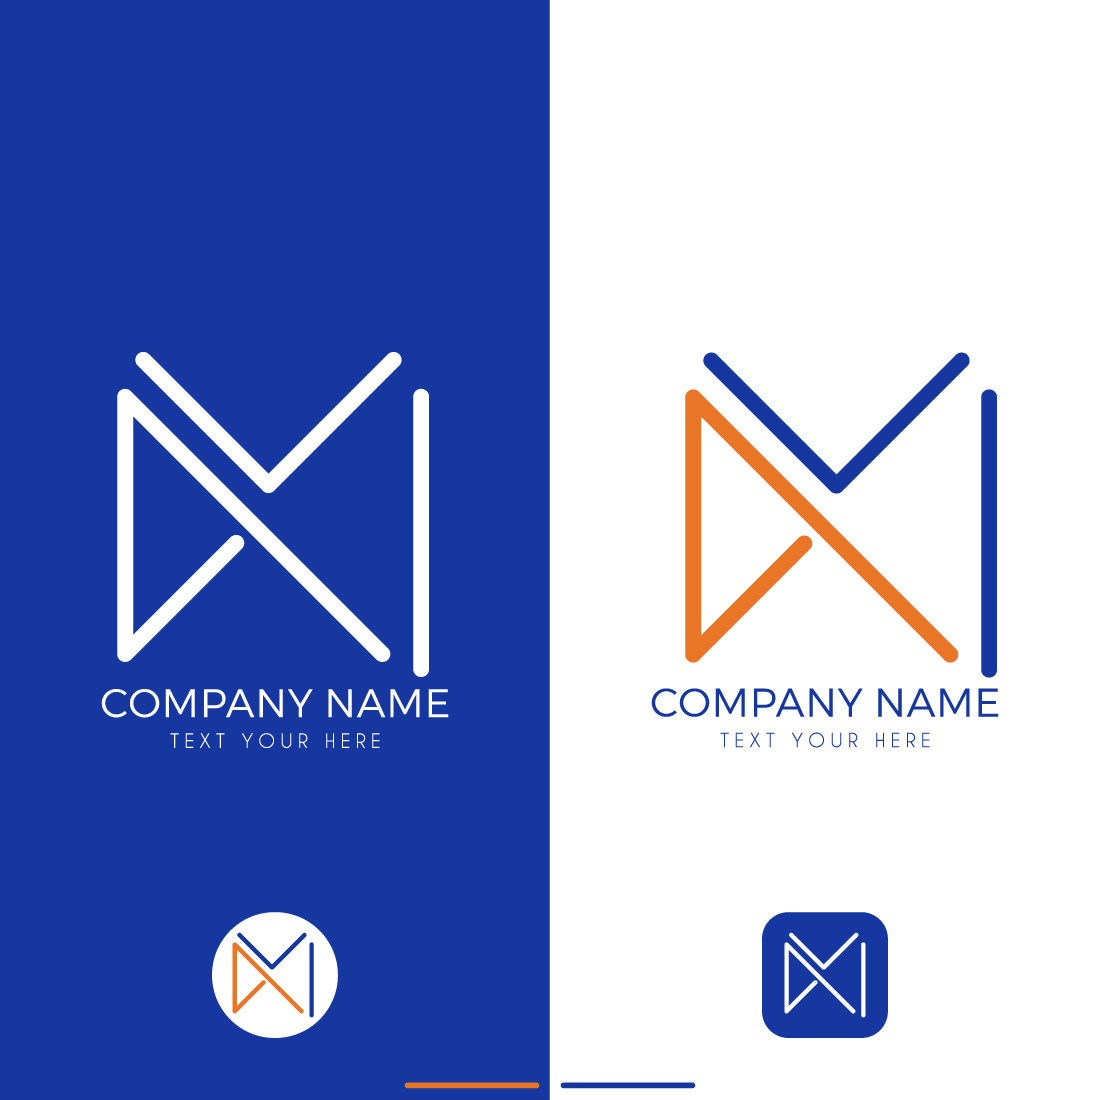 KM Company Group Linked Letter Logo Design cover image.